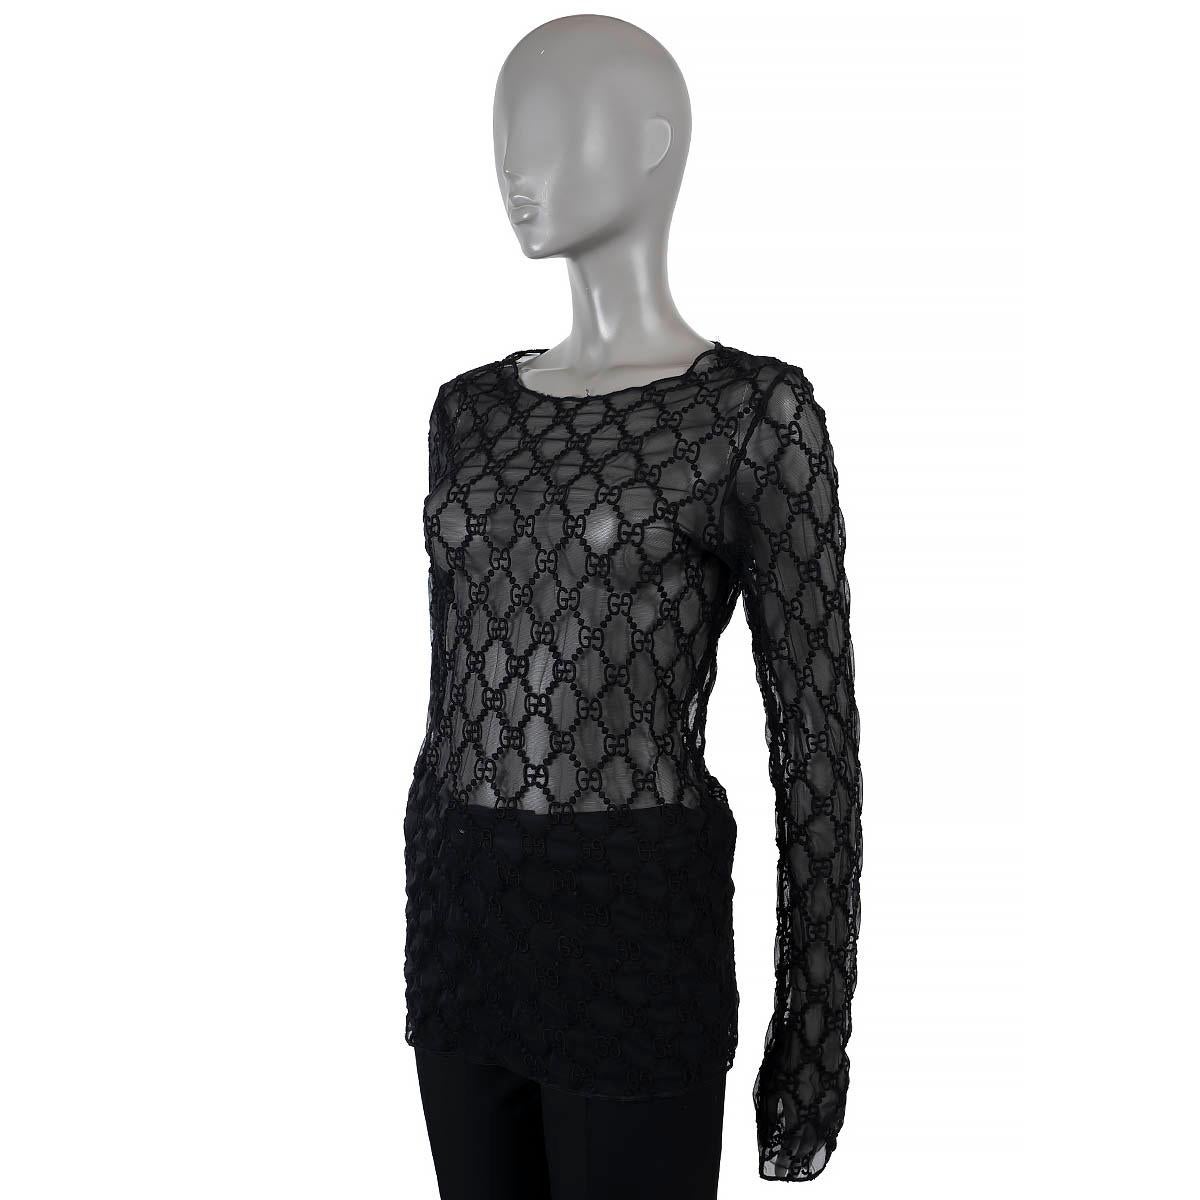 100% authentic Gucci GG embroidered sheer mesh top in black cotton (54%), polyamide (31%), polyester (9%) and elastane (6%) (missing tag). Features a round neck and long sleeves. Has been worn and is in excellent condition. 


Measurements
Tag